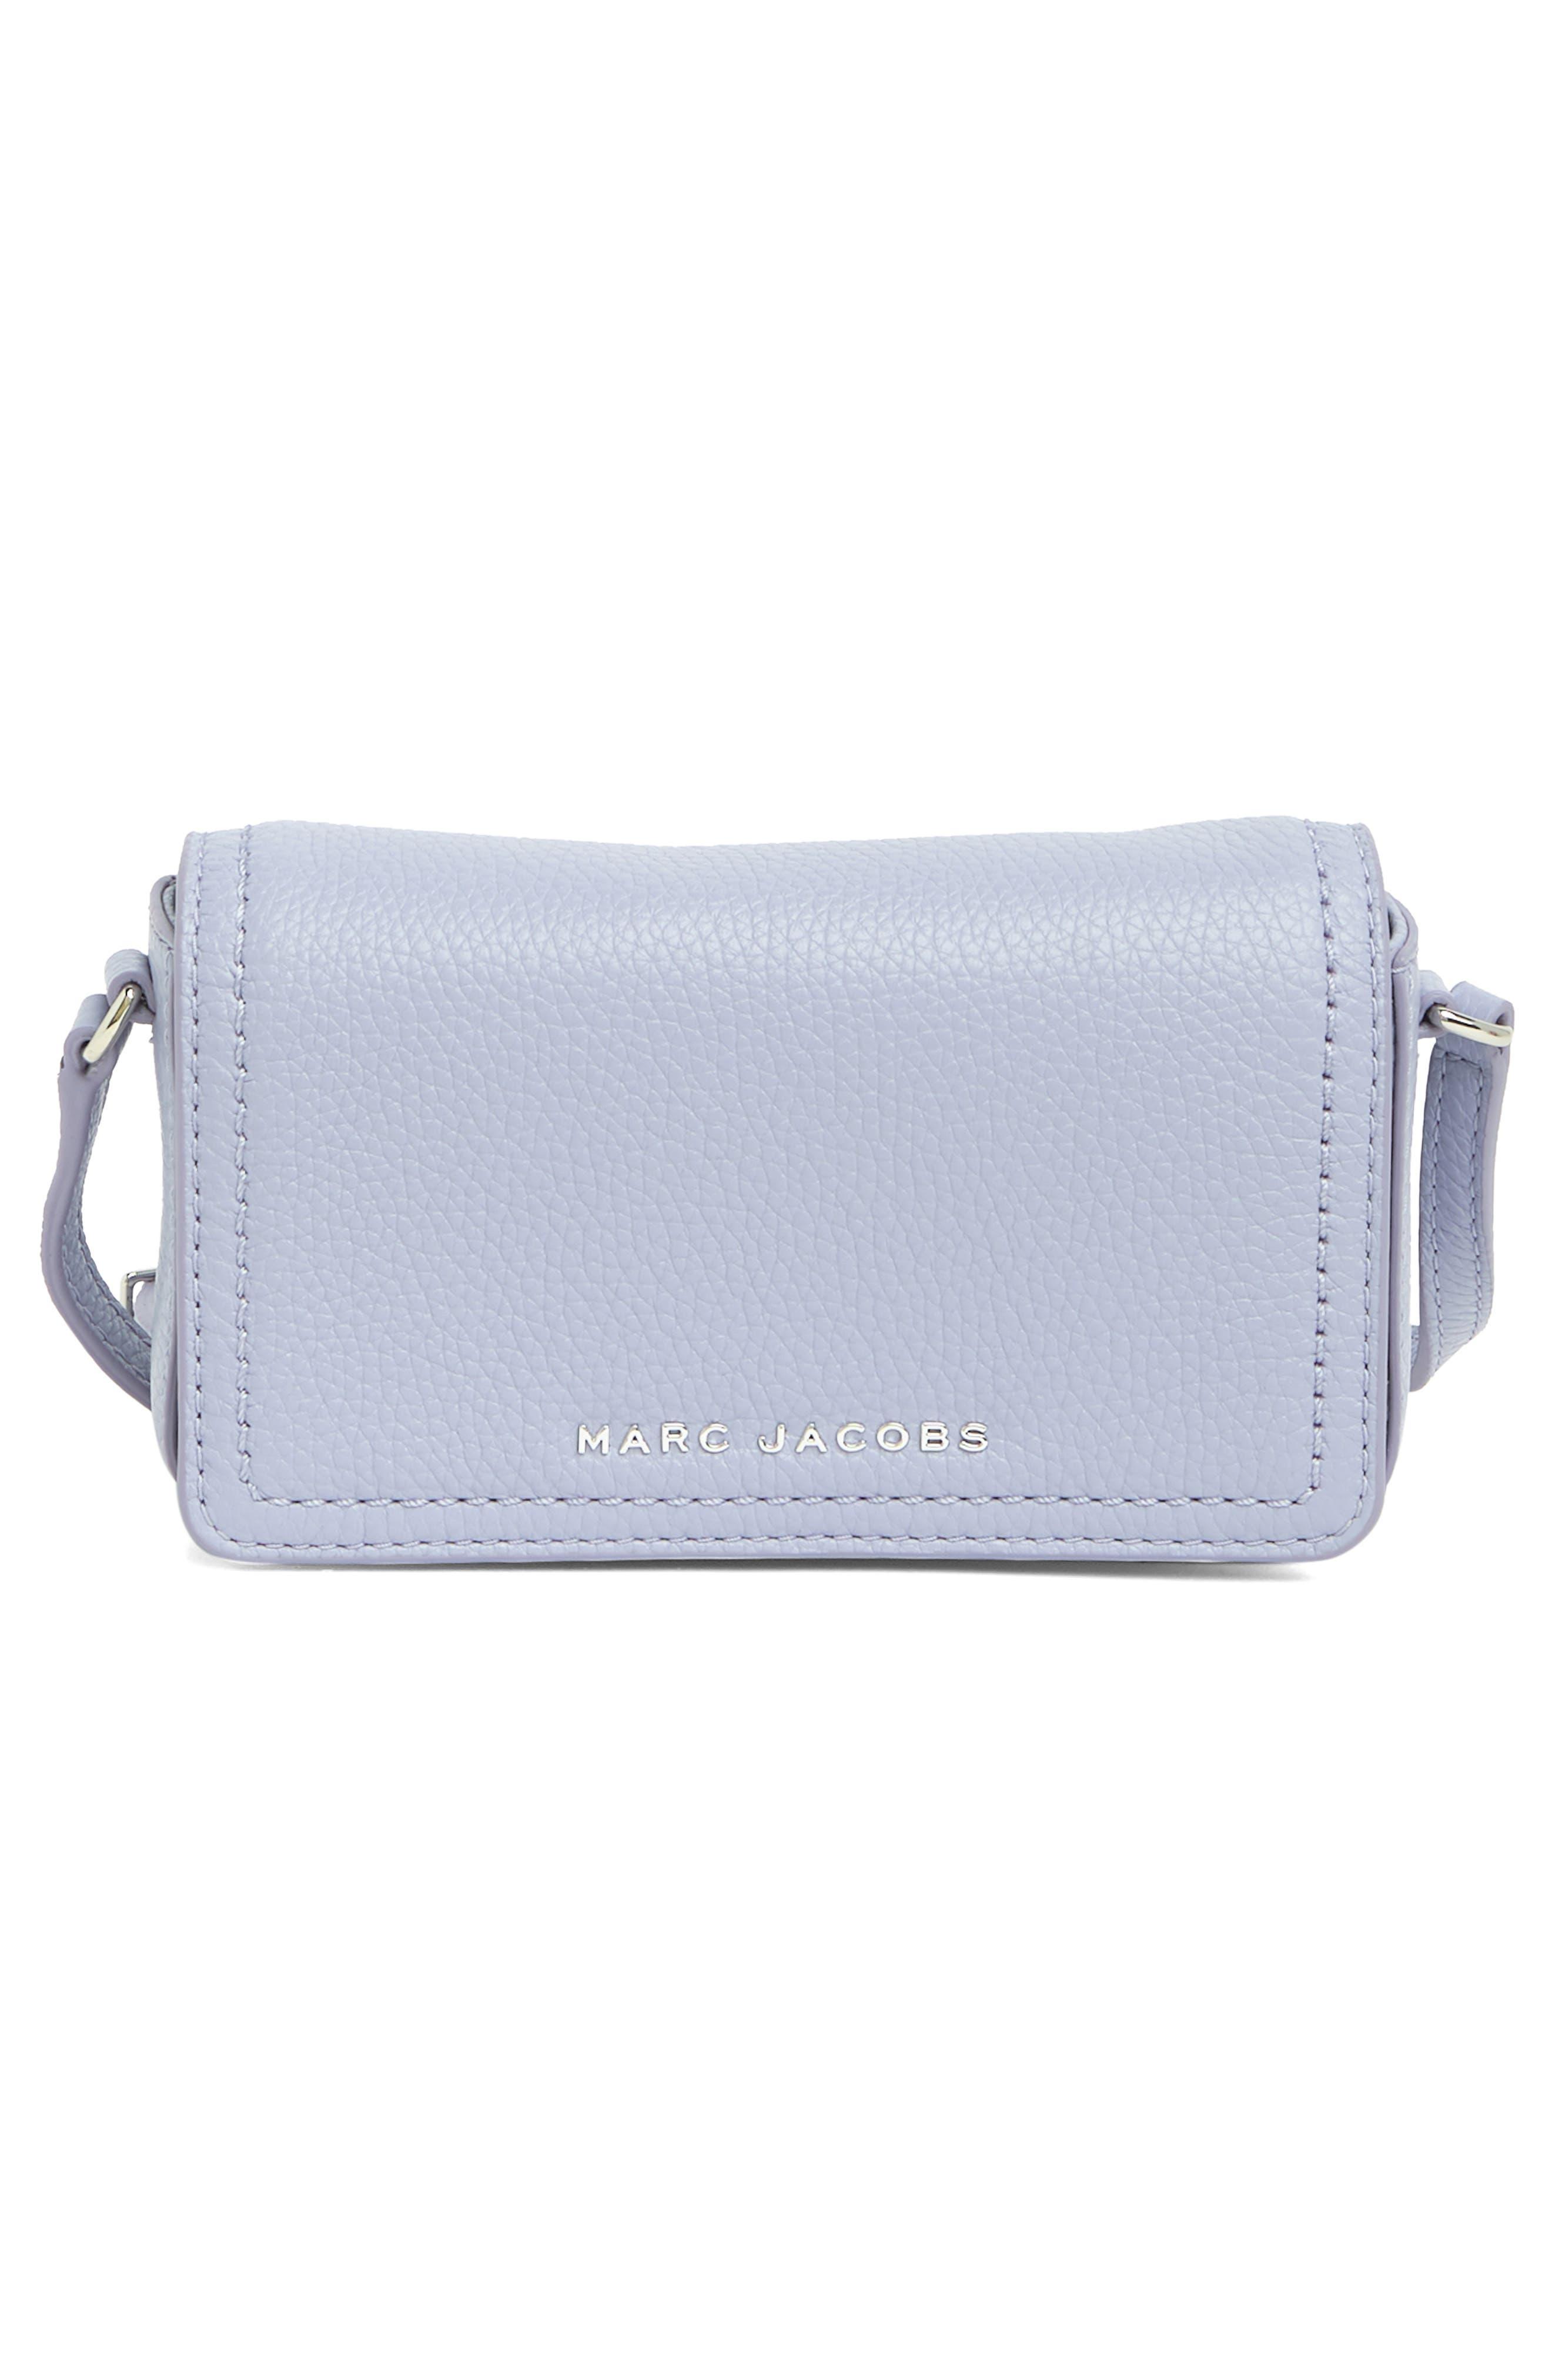 Marc Jacobs Groove Leather Mini Bag In Languid Lavender At Nordstrom Rack